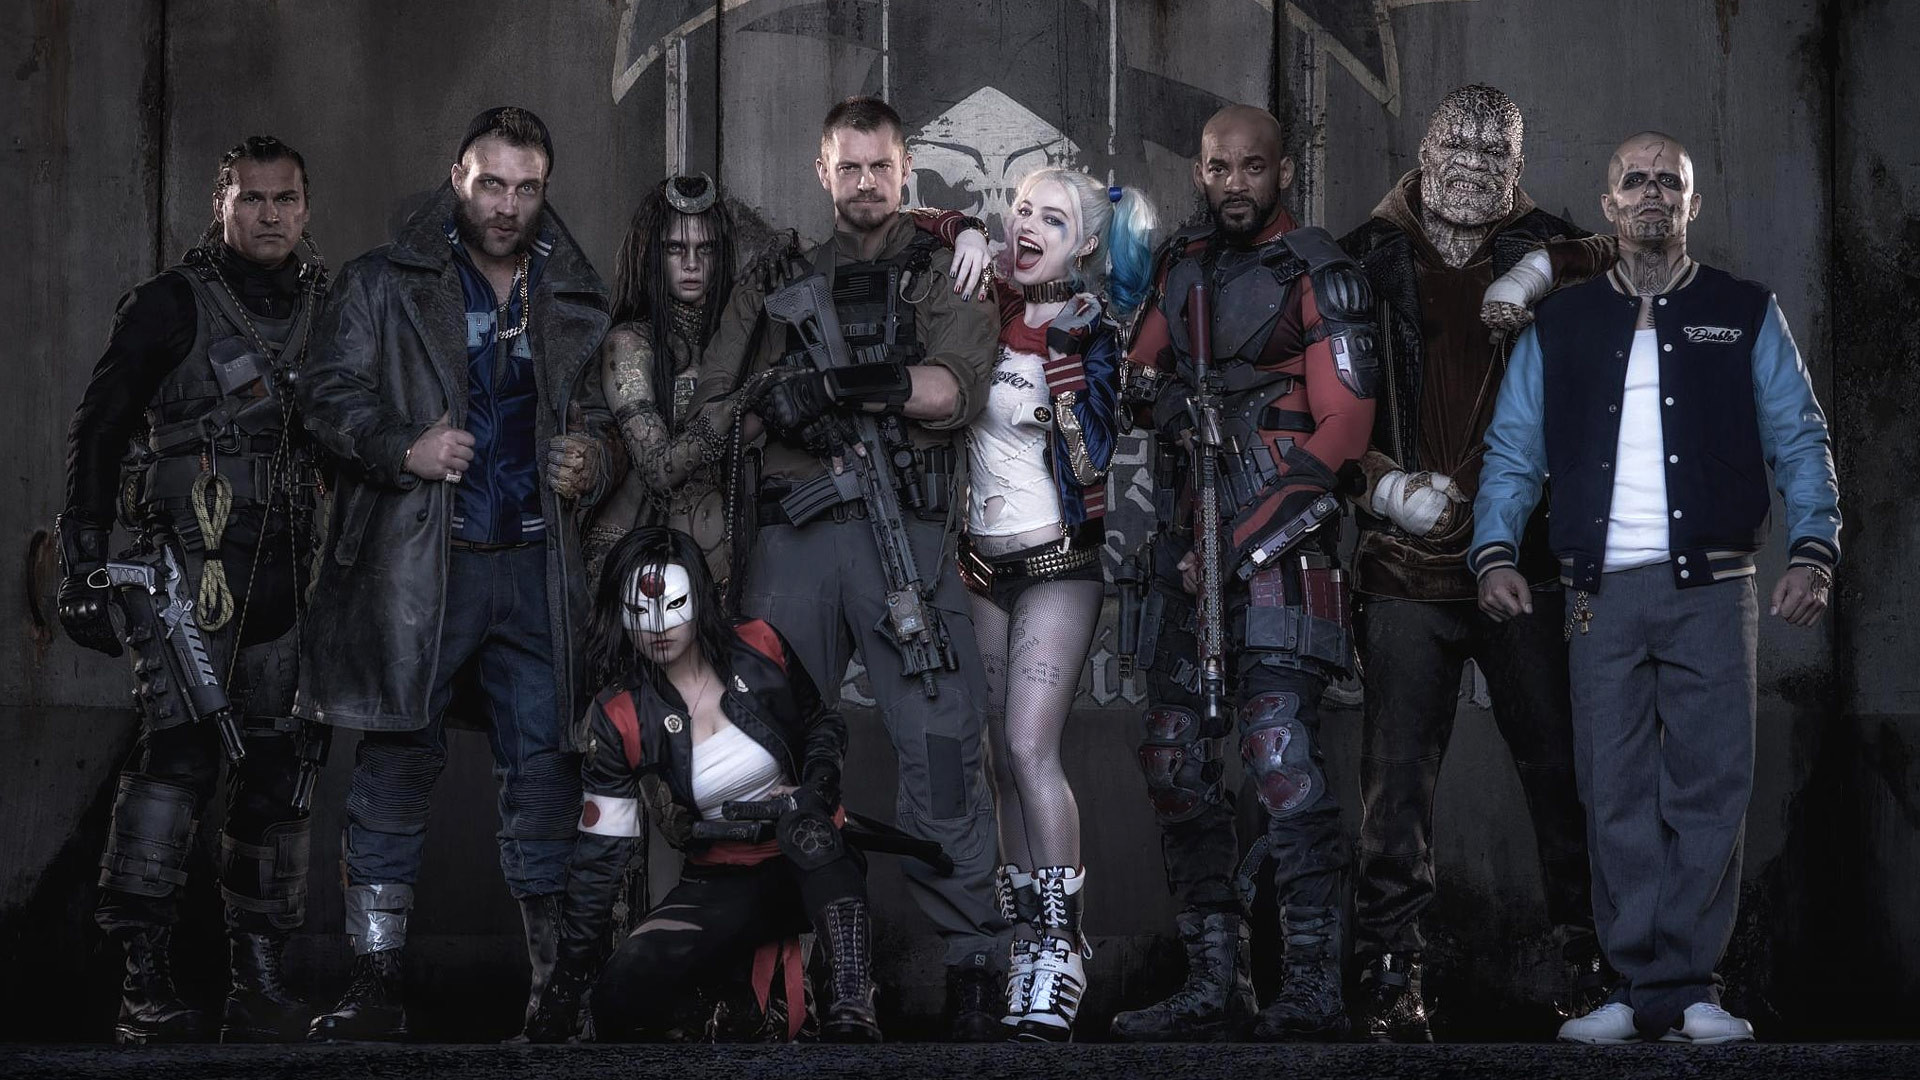 1920x1080 Suicide squad 2016 wallpaper full hd wallpapers for 1080p 